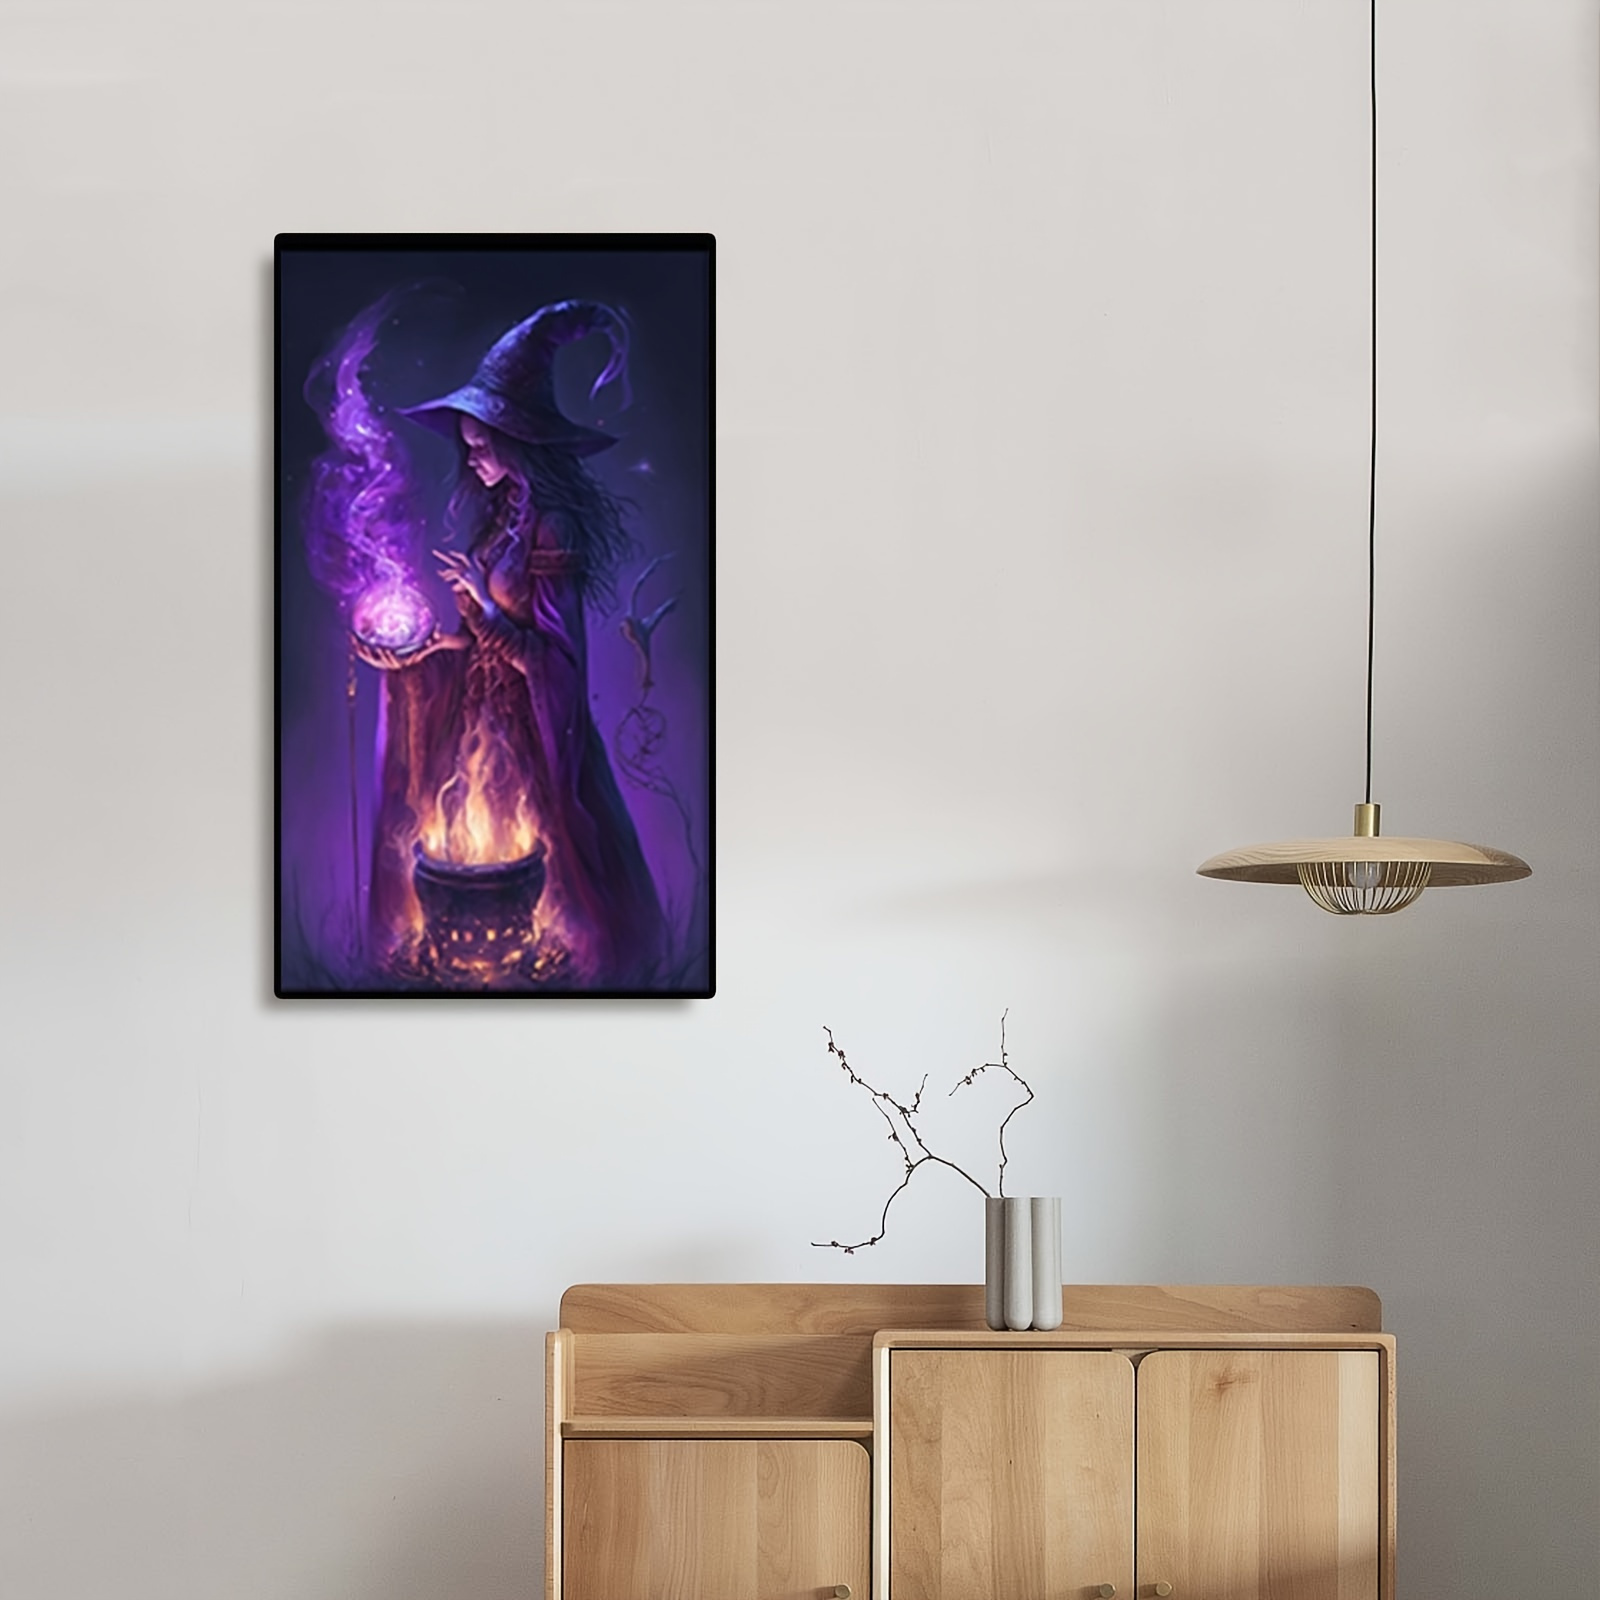 Hallowmas Diamond Art Painting Kits For Adults, Ghost Boo Bat Diamond  Painting Kits For Beginners, Full Diamond Diamond Dots Paintings Gem Art  Painting Kits Diy Adult Crafts For Wall Decor Gifts 